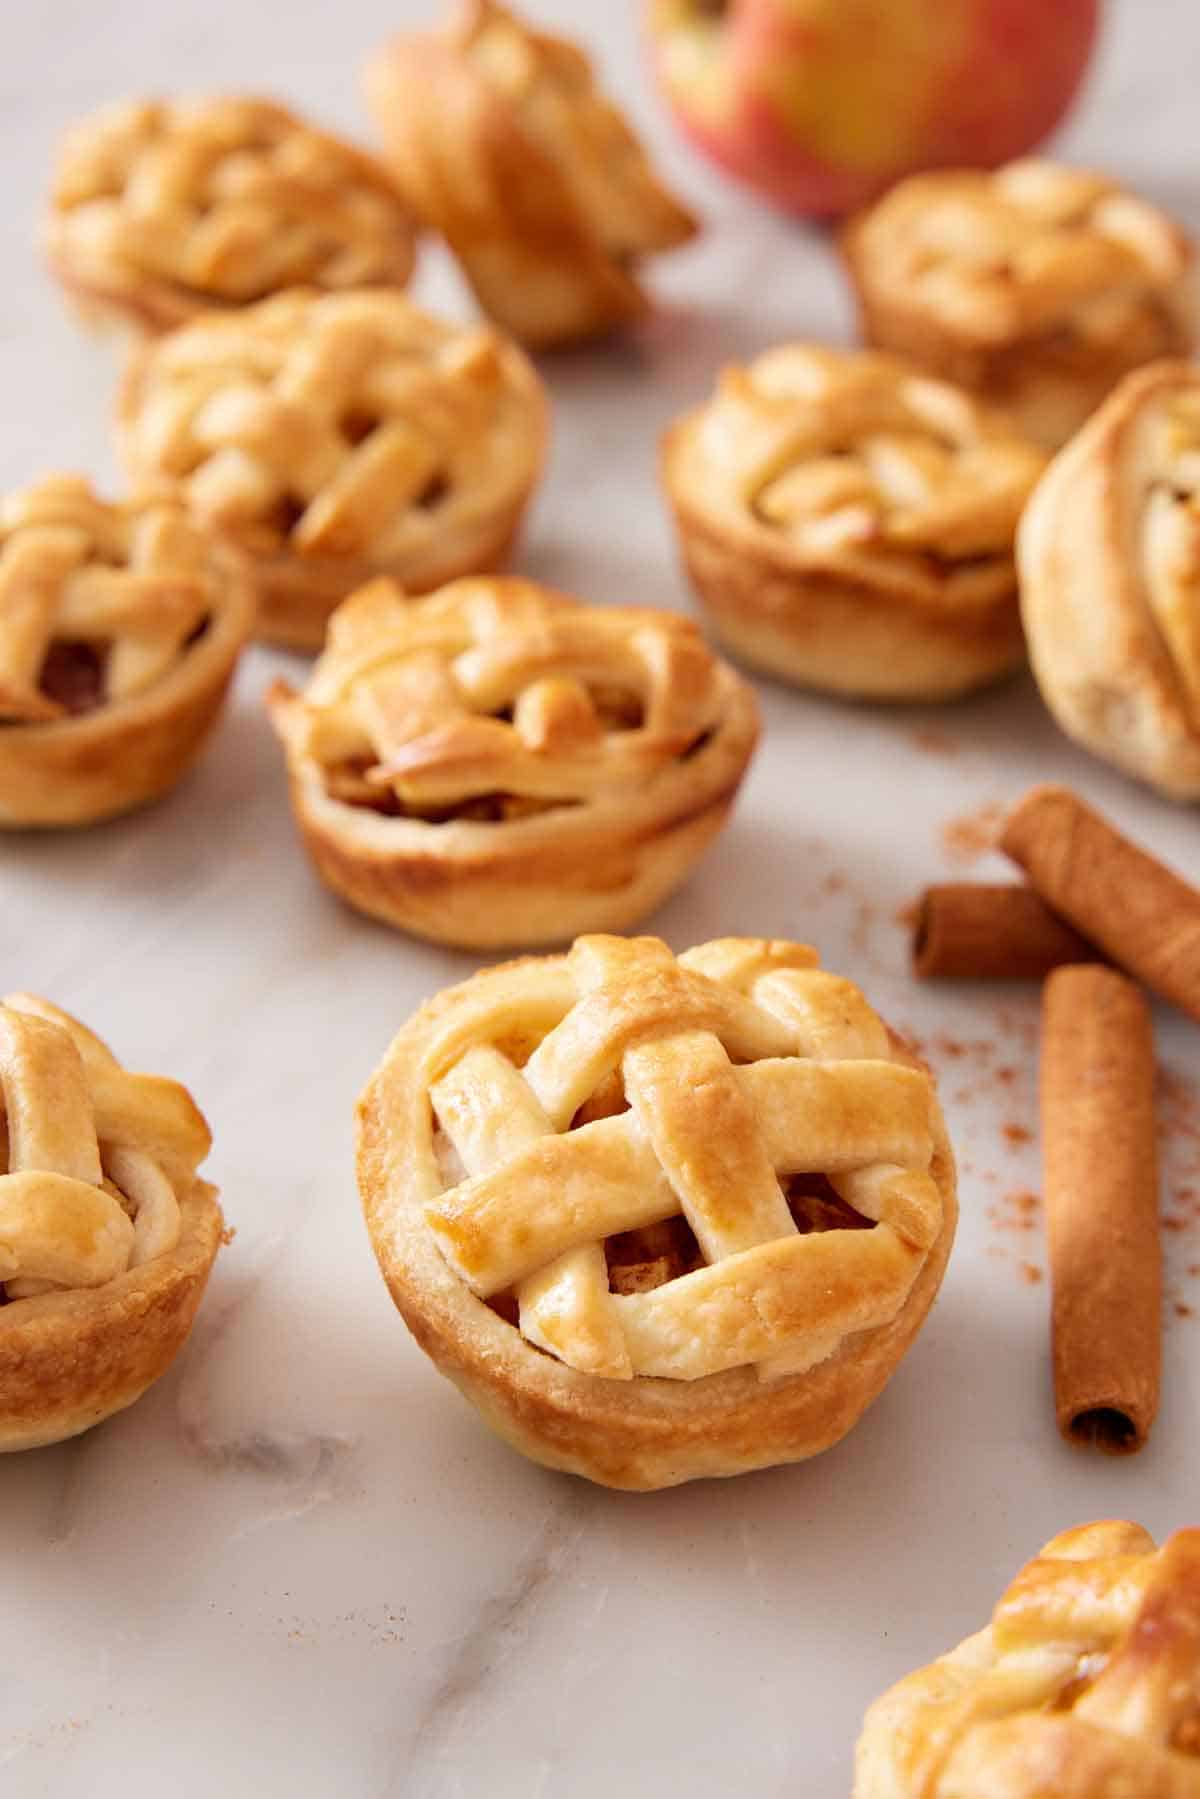 Multiple mini apple pies on a marble surface with cinnamon sticks on the side.